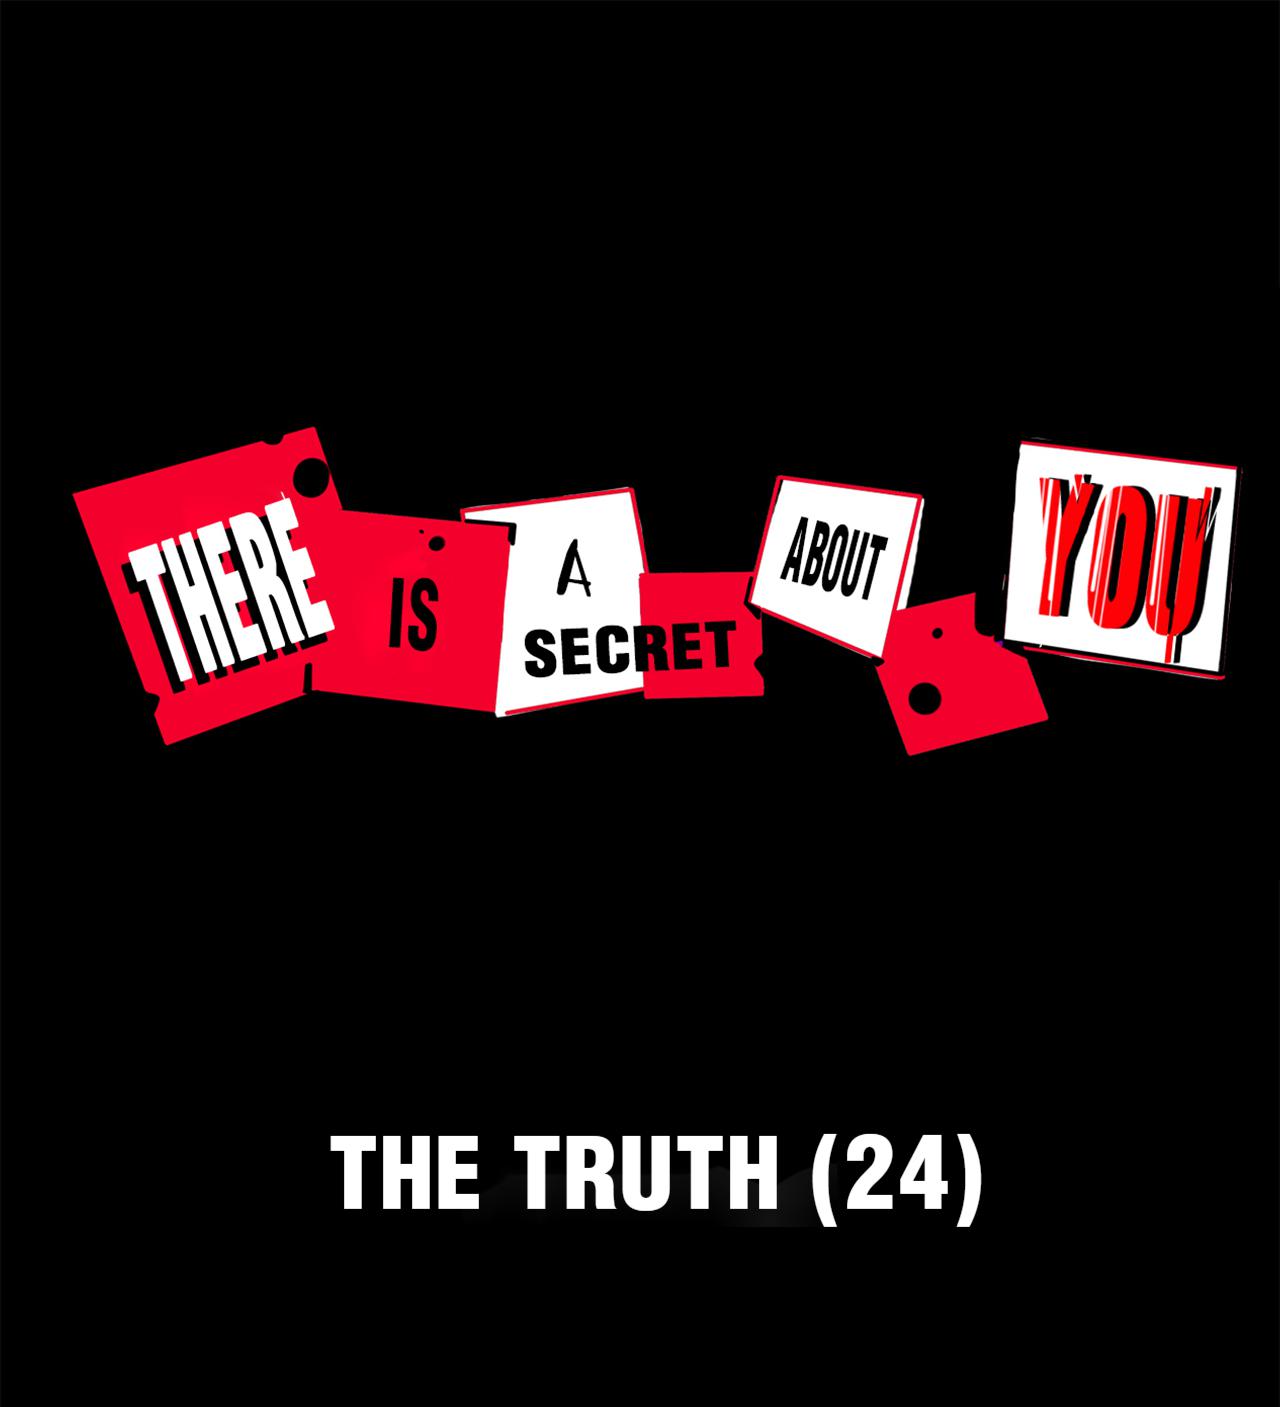 There Is a Secret About You 57